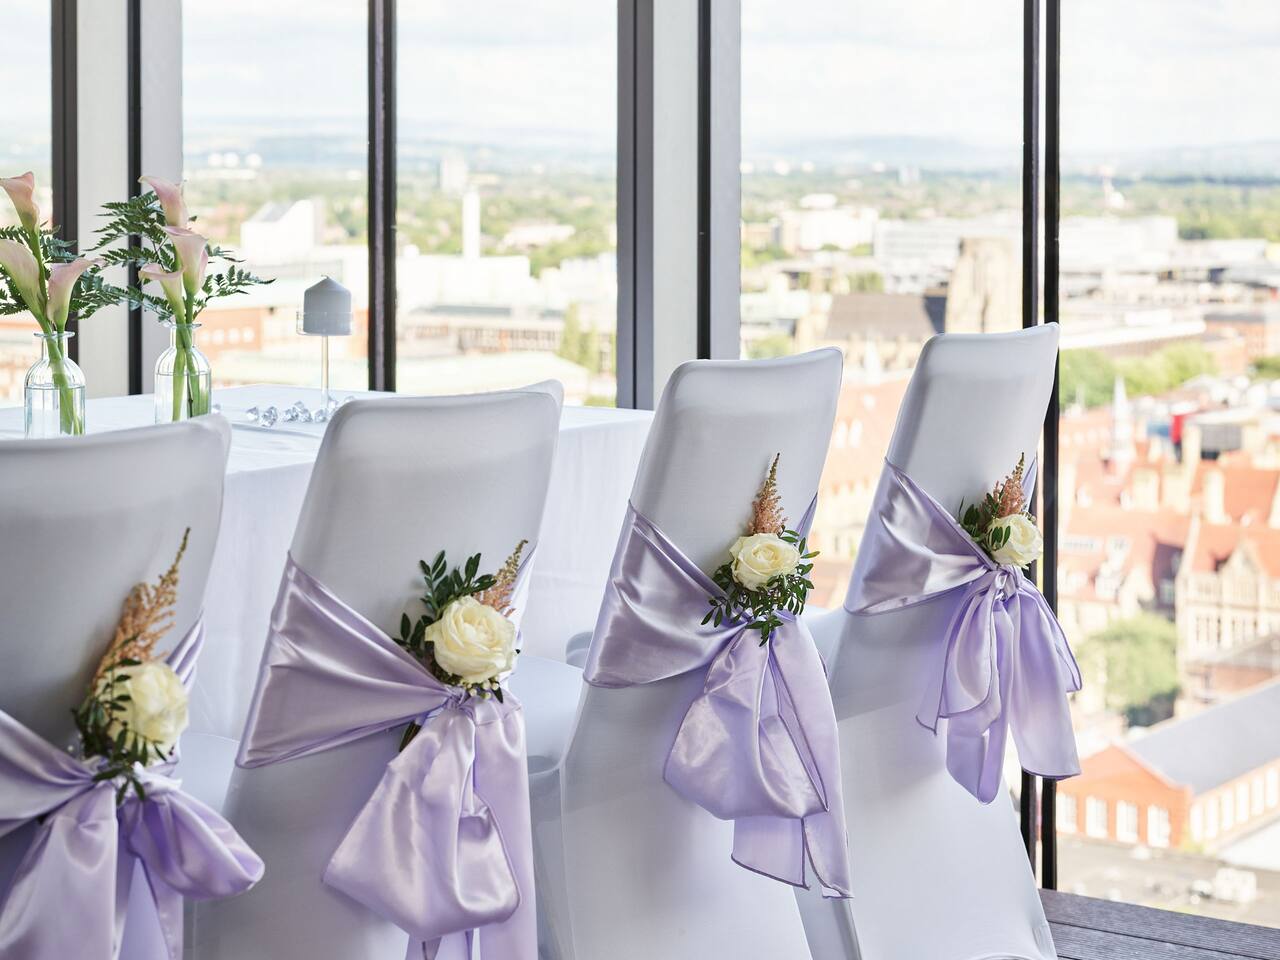 Wedding chairs lined up with view out of window